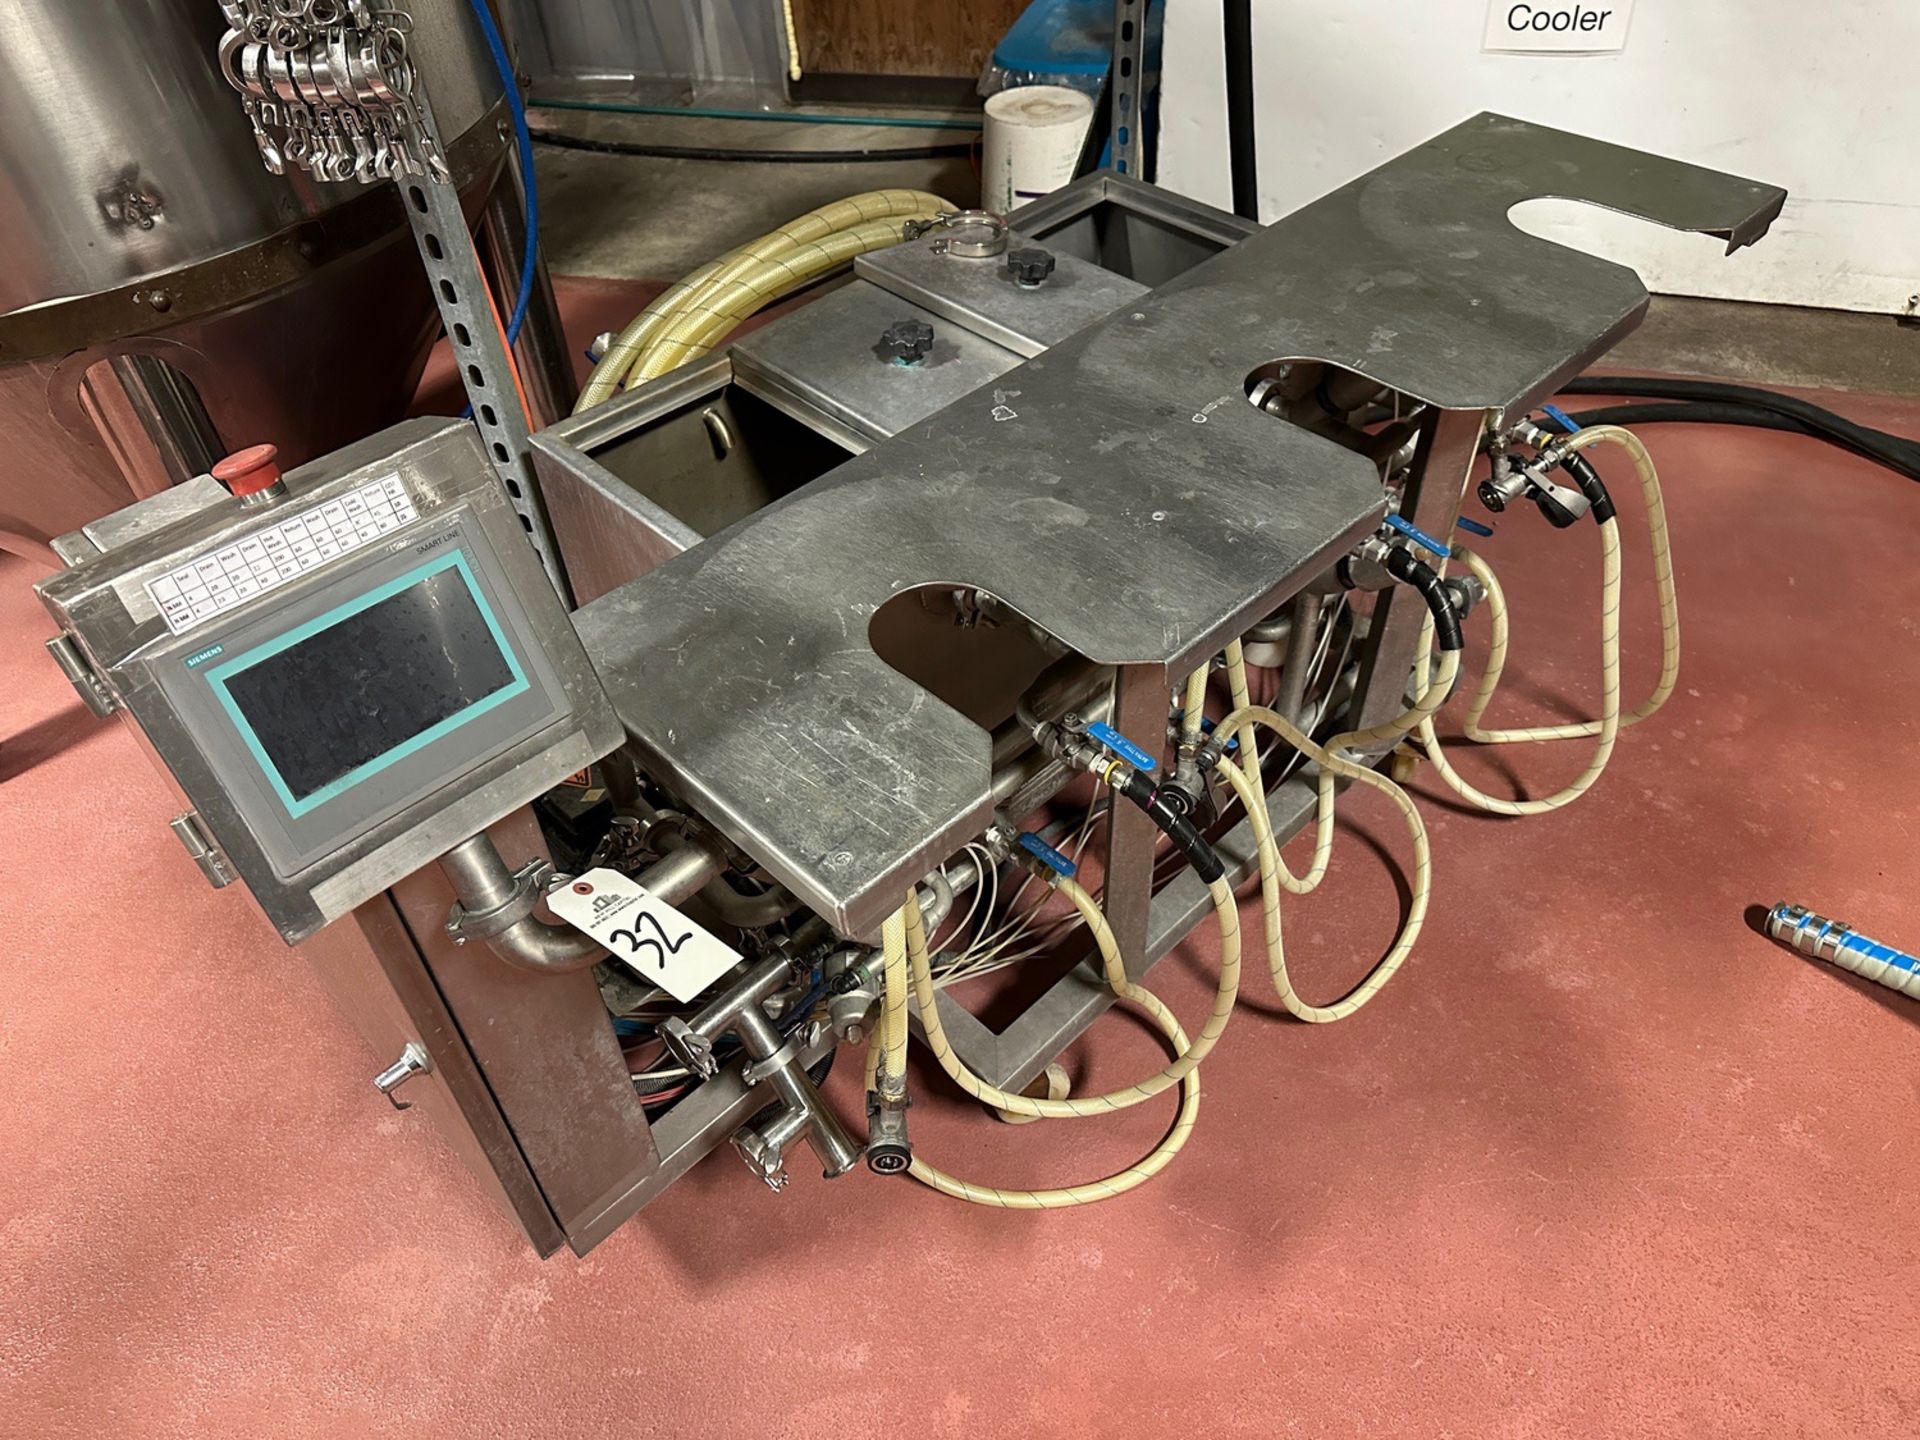 Stainless Steel Keg Washer with Seimens Smart Line Control Panel | Rig Fee $350